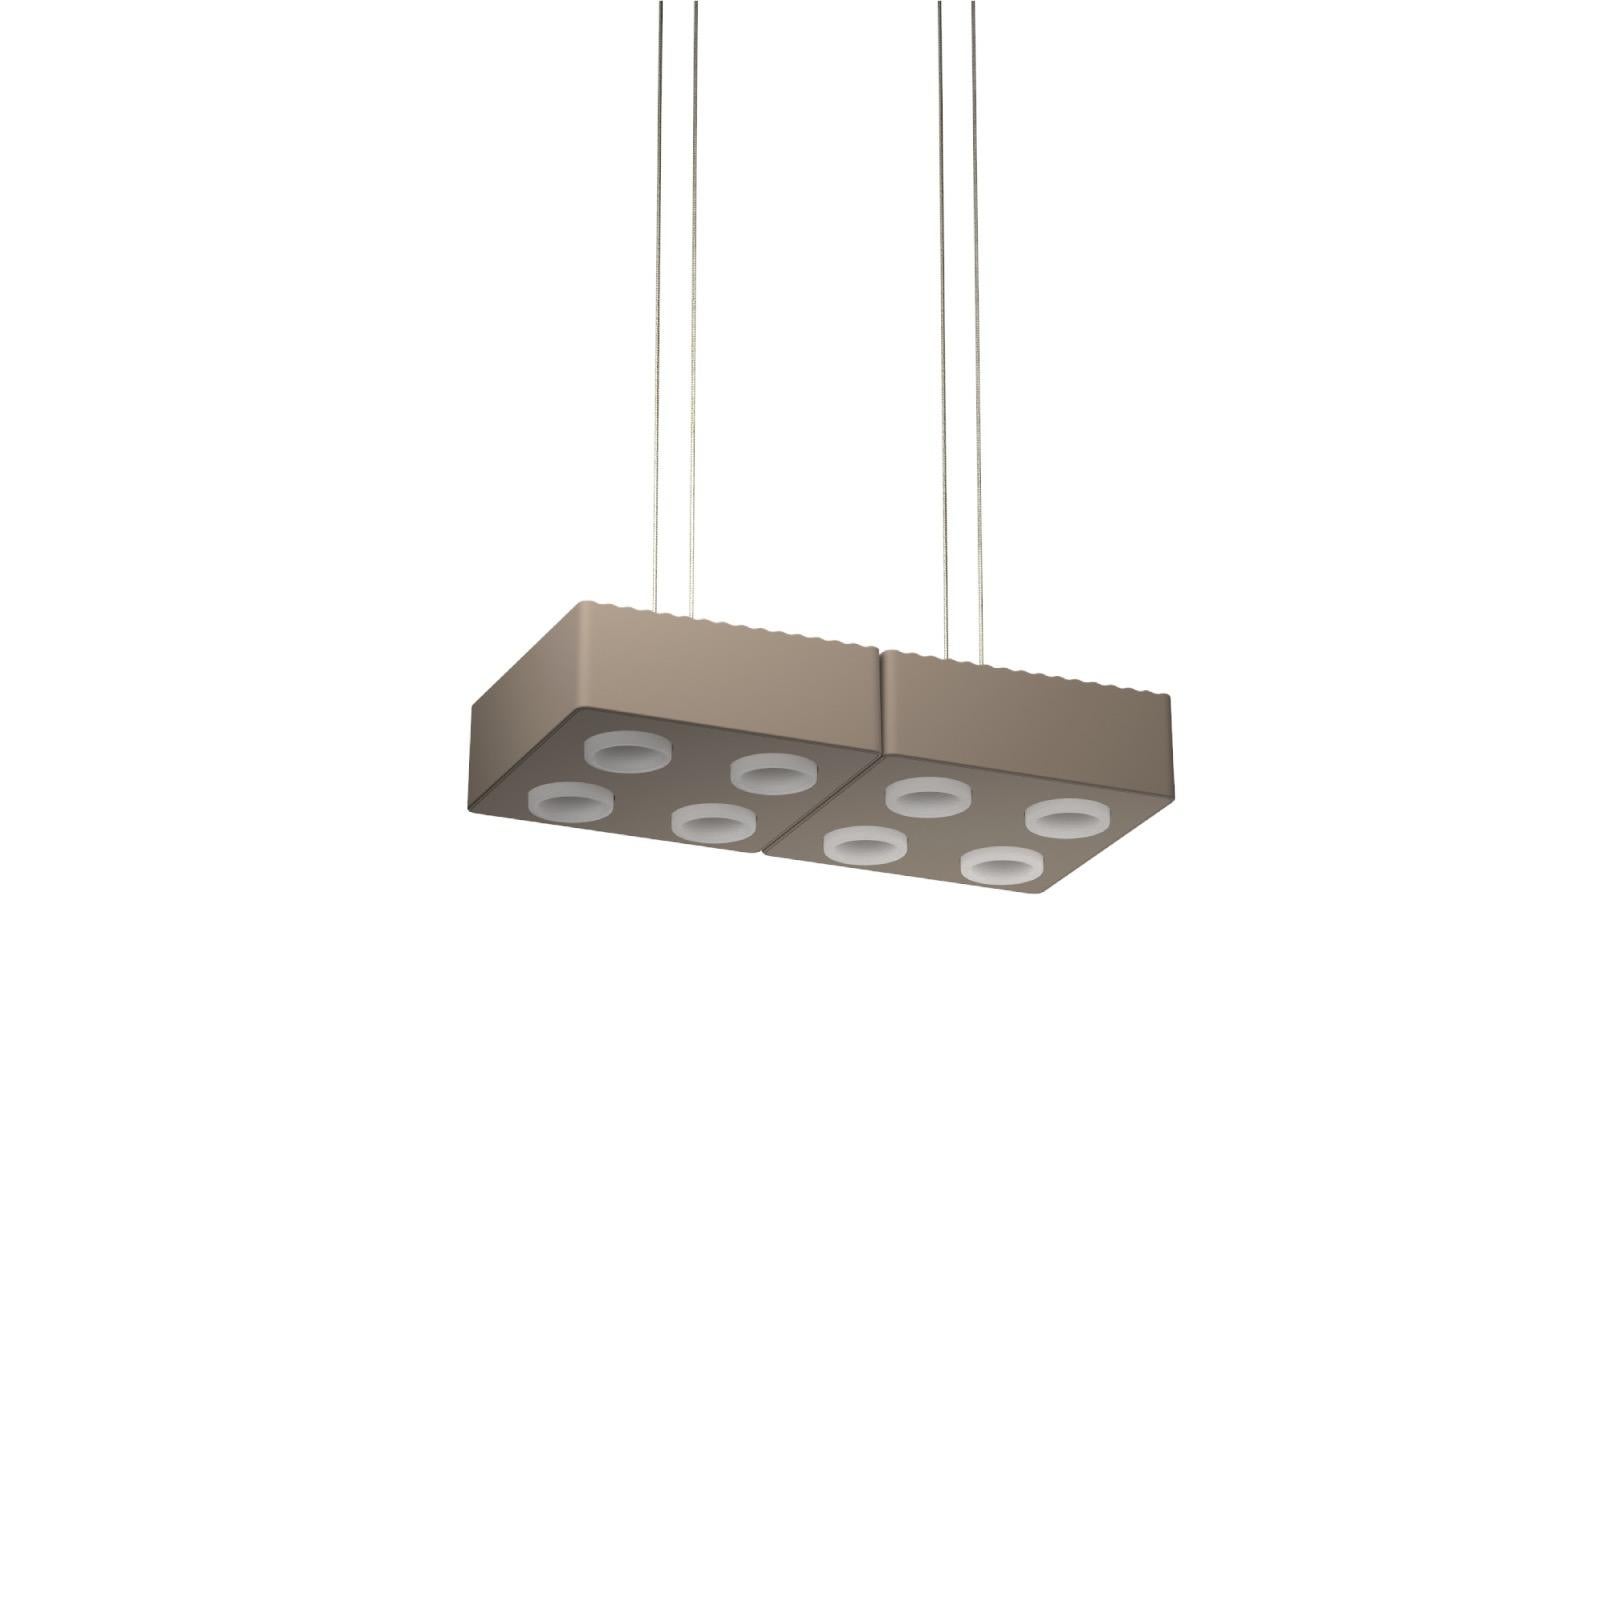 Domino Pendant lamp by Sylvain Willenz x AGO Lighting
Mud Gray - Double Pendant Lamp

Materials: Aluminum 
Light Source: Integrated LED (COB), DC
Watt. 30 W (15W x 2)
Color temp. 2700 / 3000K
Cable Length: 3m 

Available colors:
Charcoal,